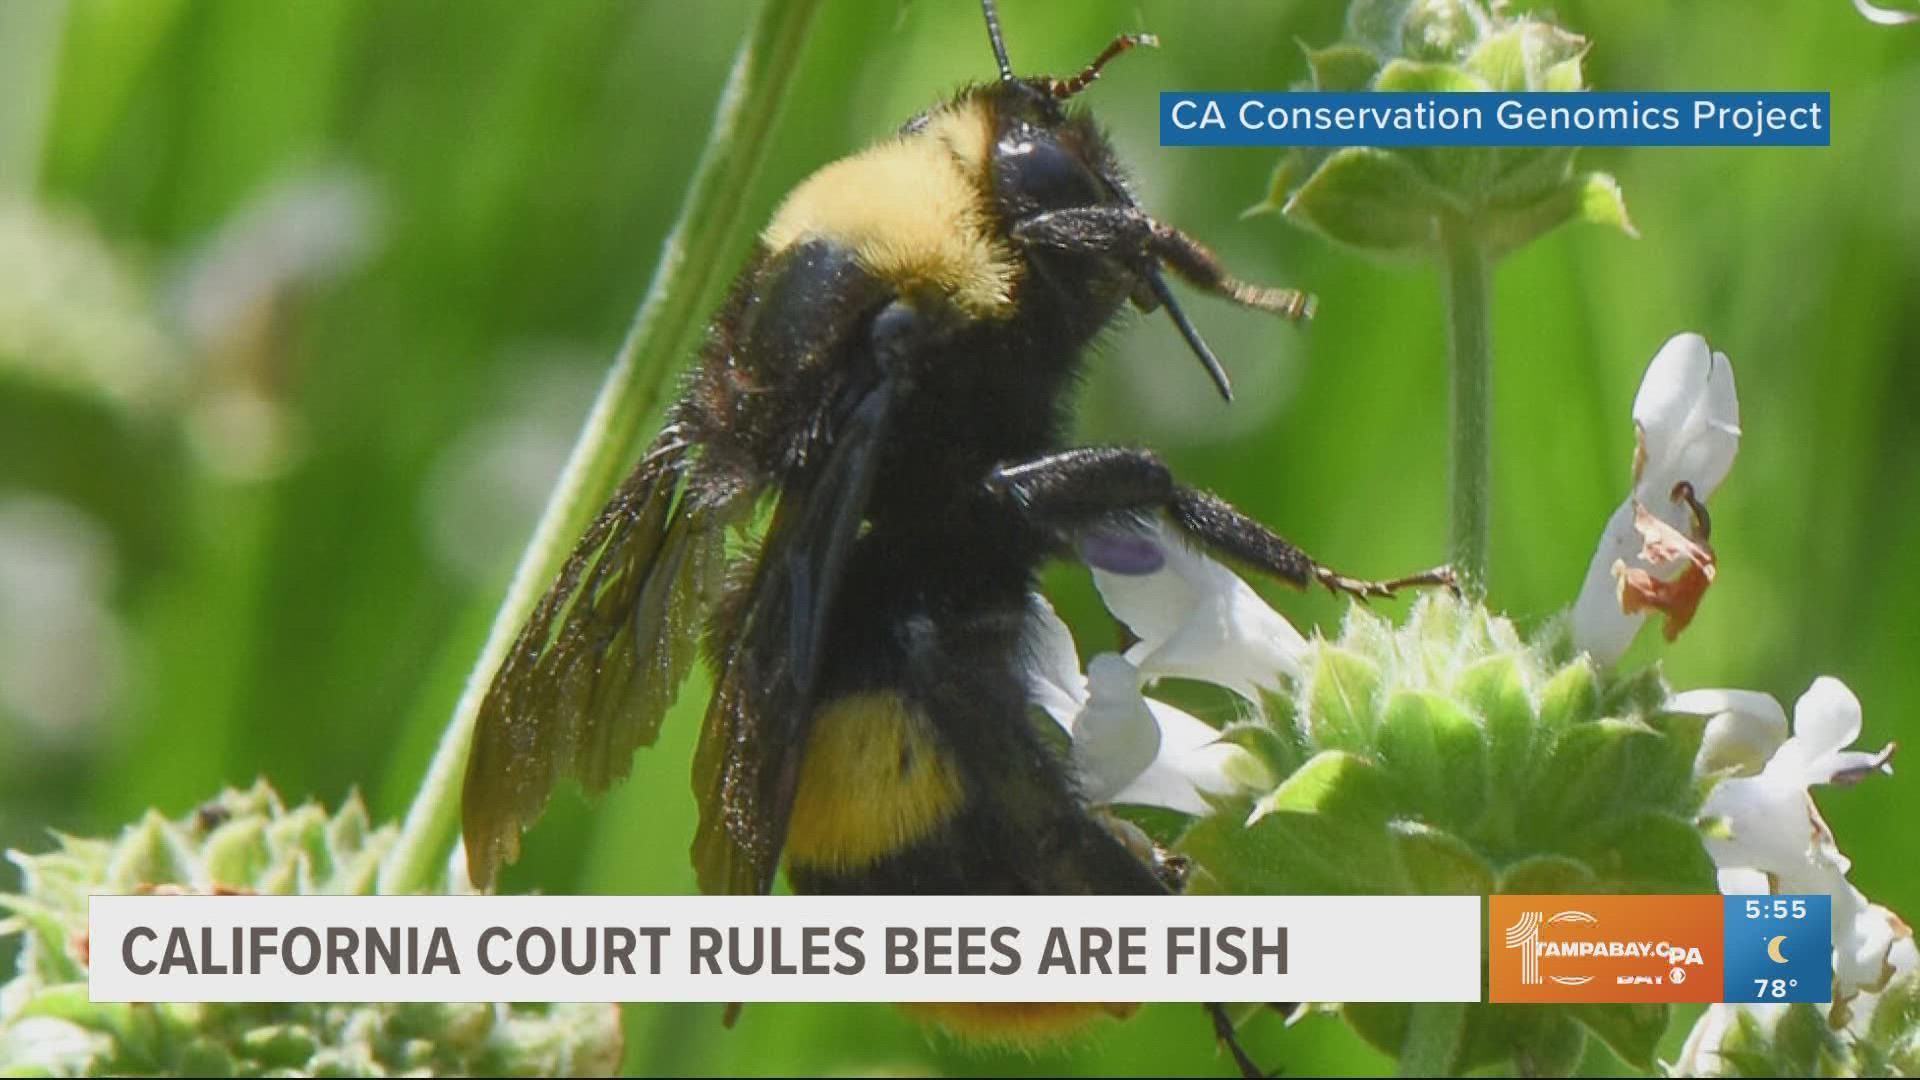 The decision comes after a lengthy legal dispute to list four species of bumblebees as endangered under the California Endangered Species Act.